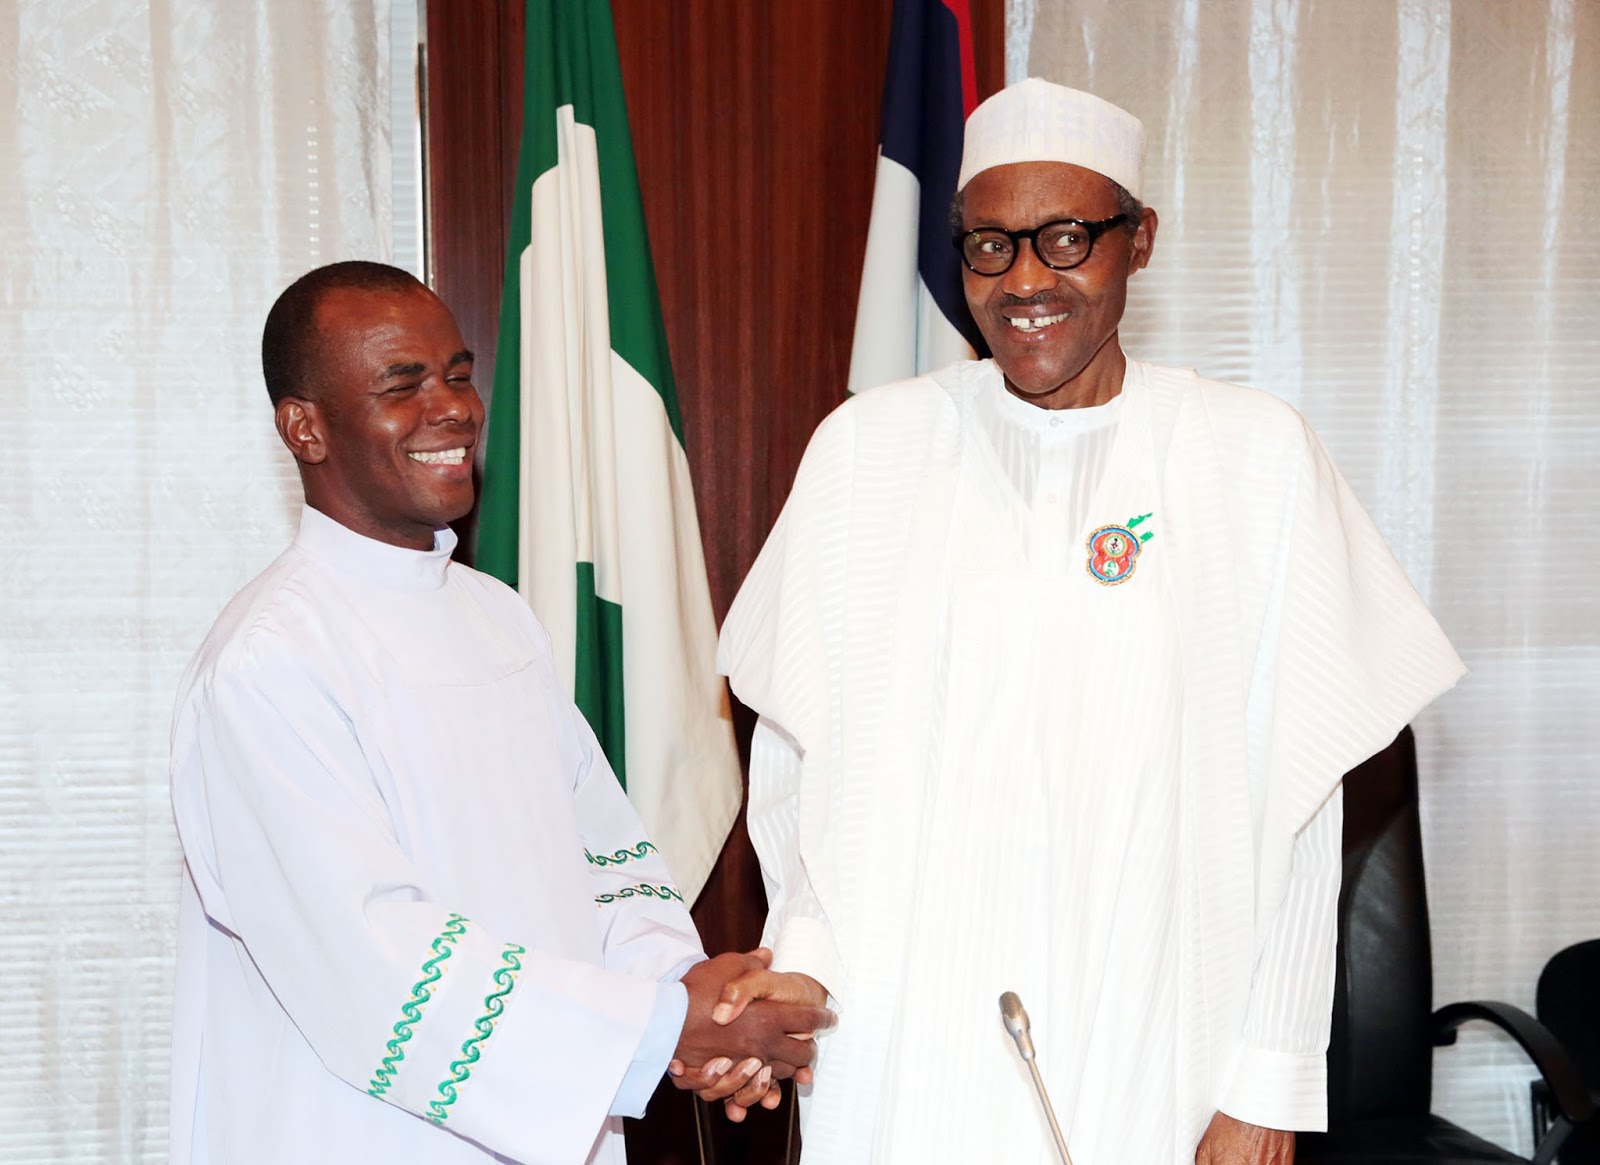 Father Mbaka Drops Another Shocking Prophesy About Buhari’s Health, See What He Said